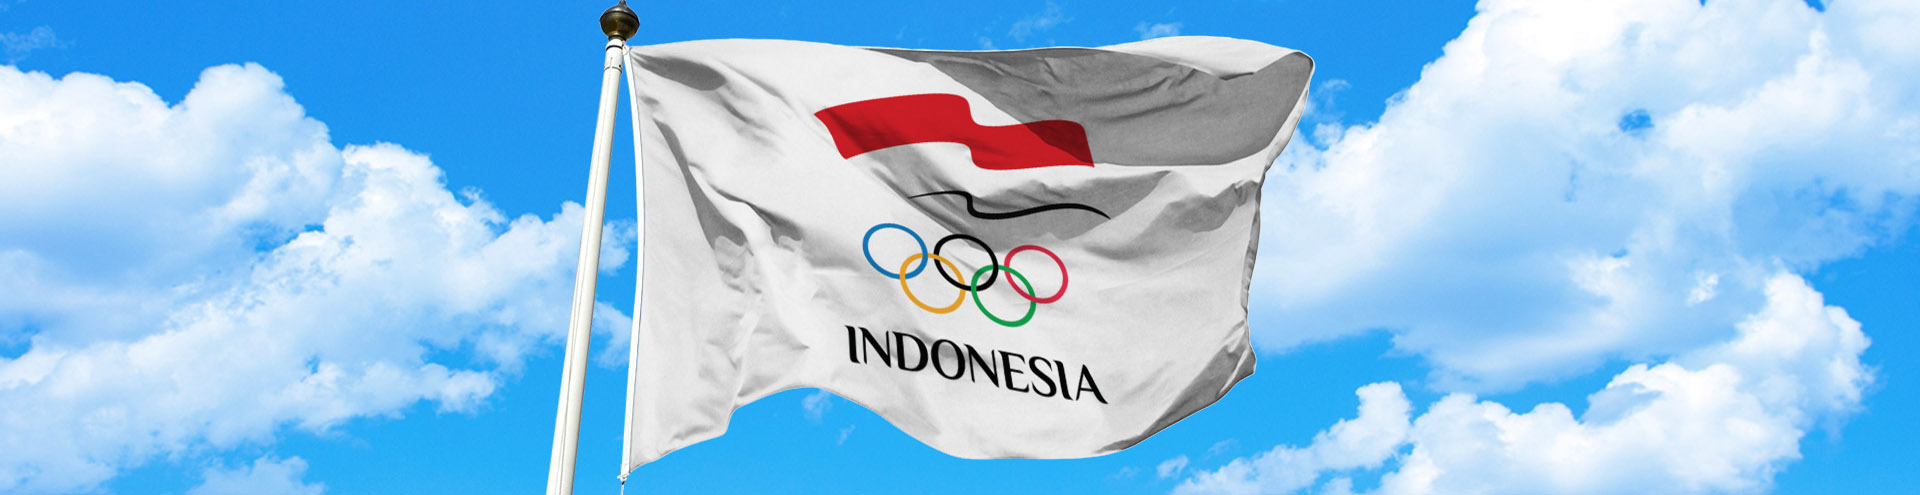 NOC Indonesia Promotes Gender Equality - Indonesia Olympic Commitee